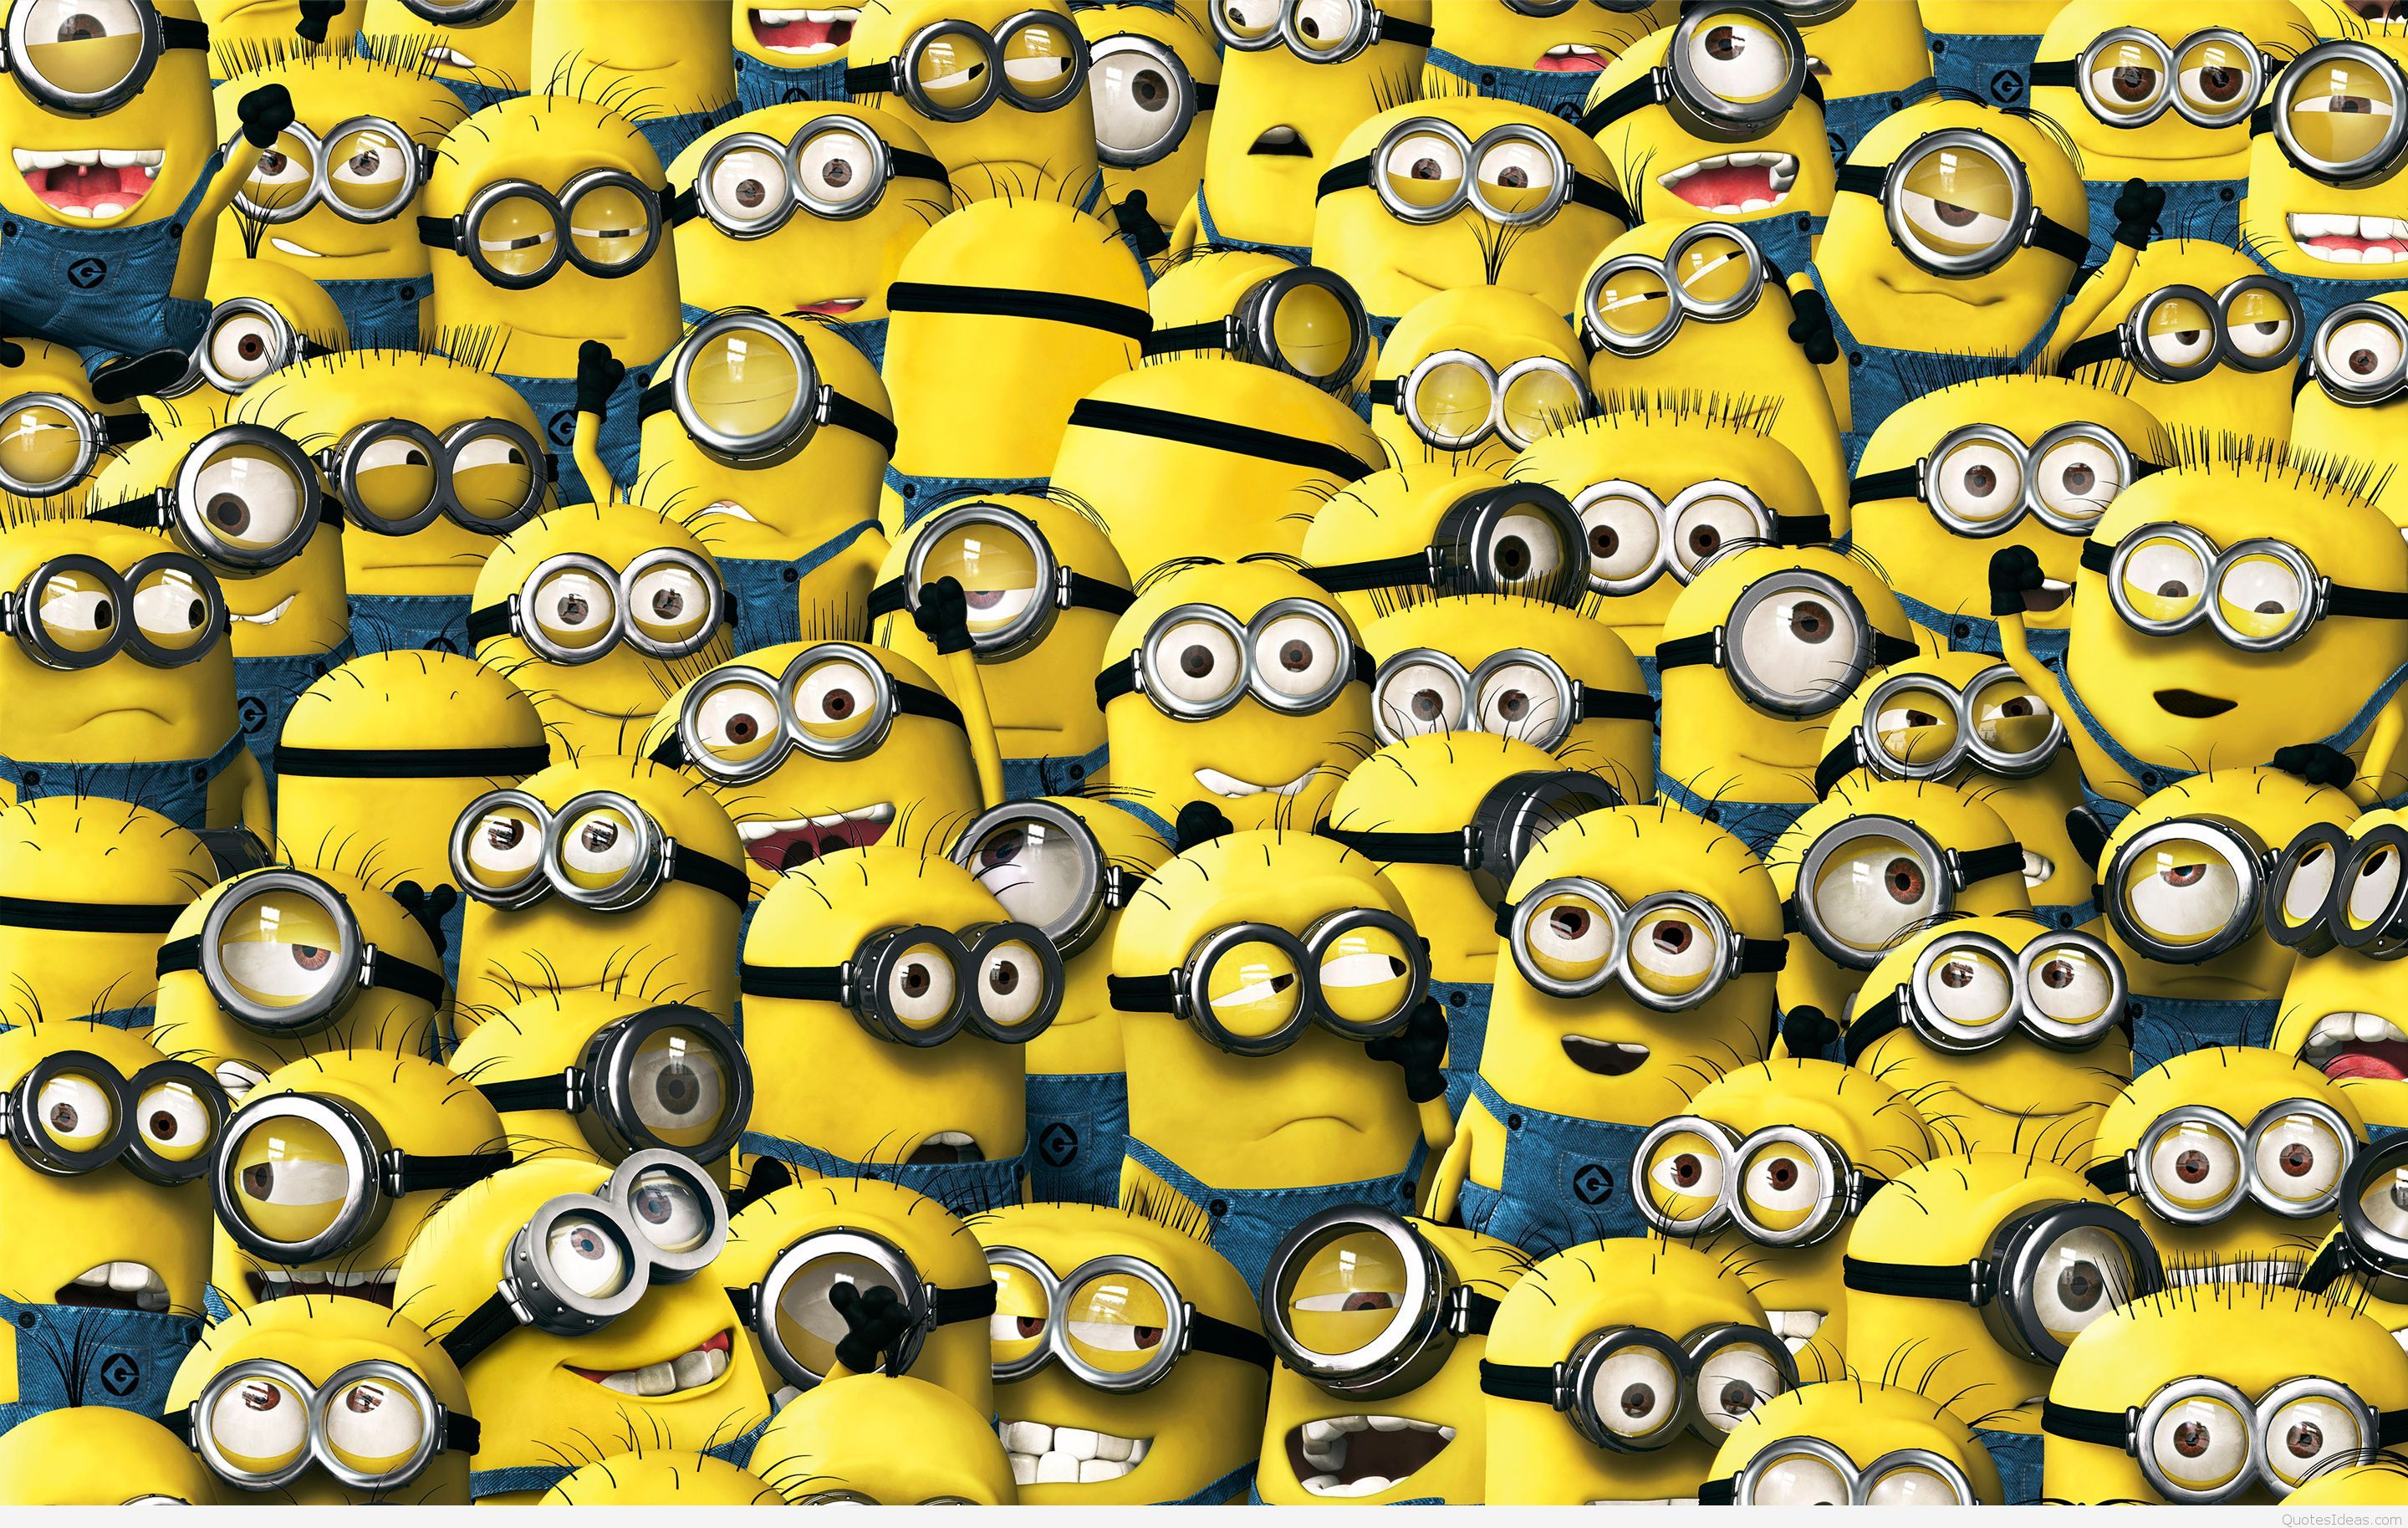 minions background tumblr 10. Background Check All